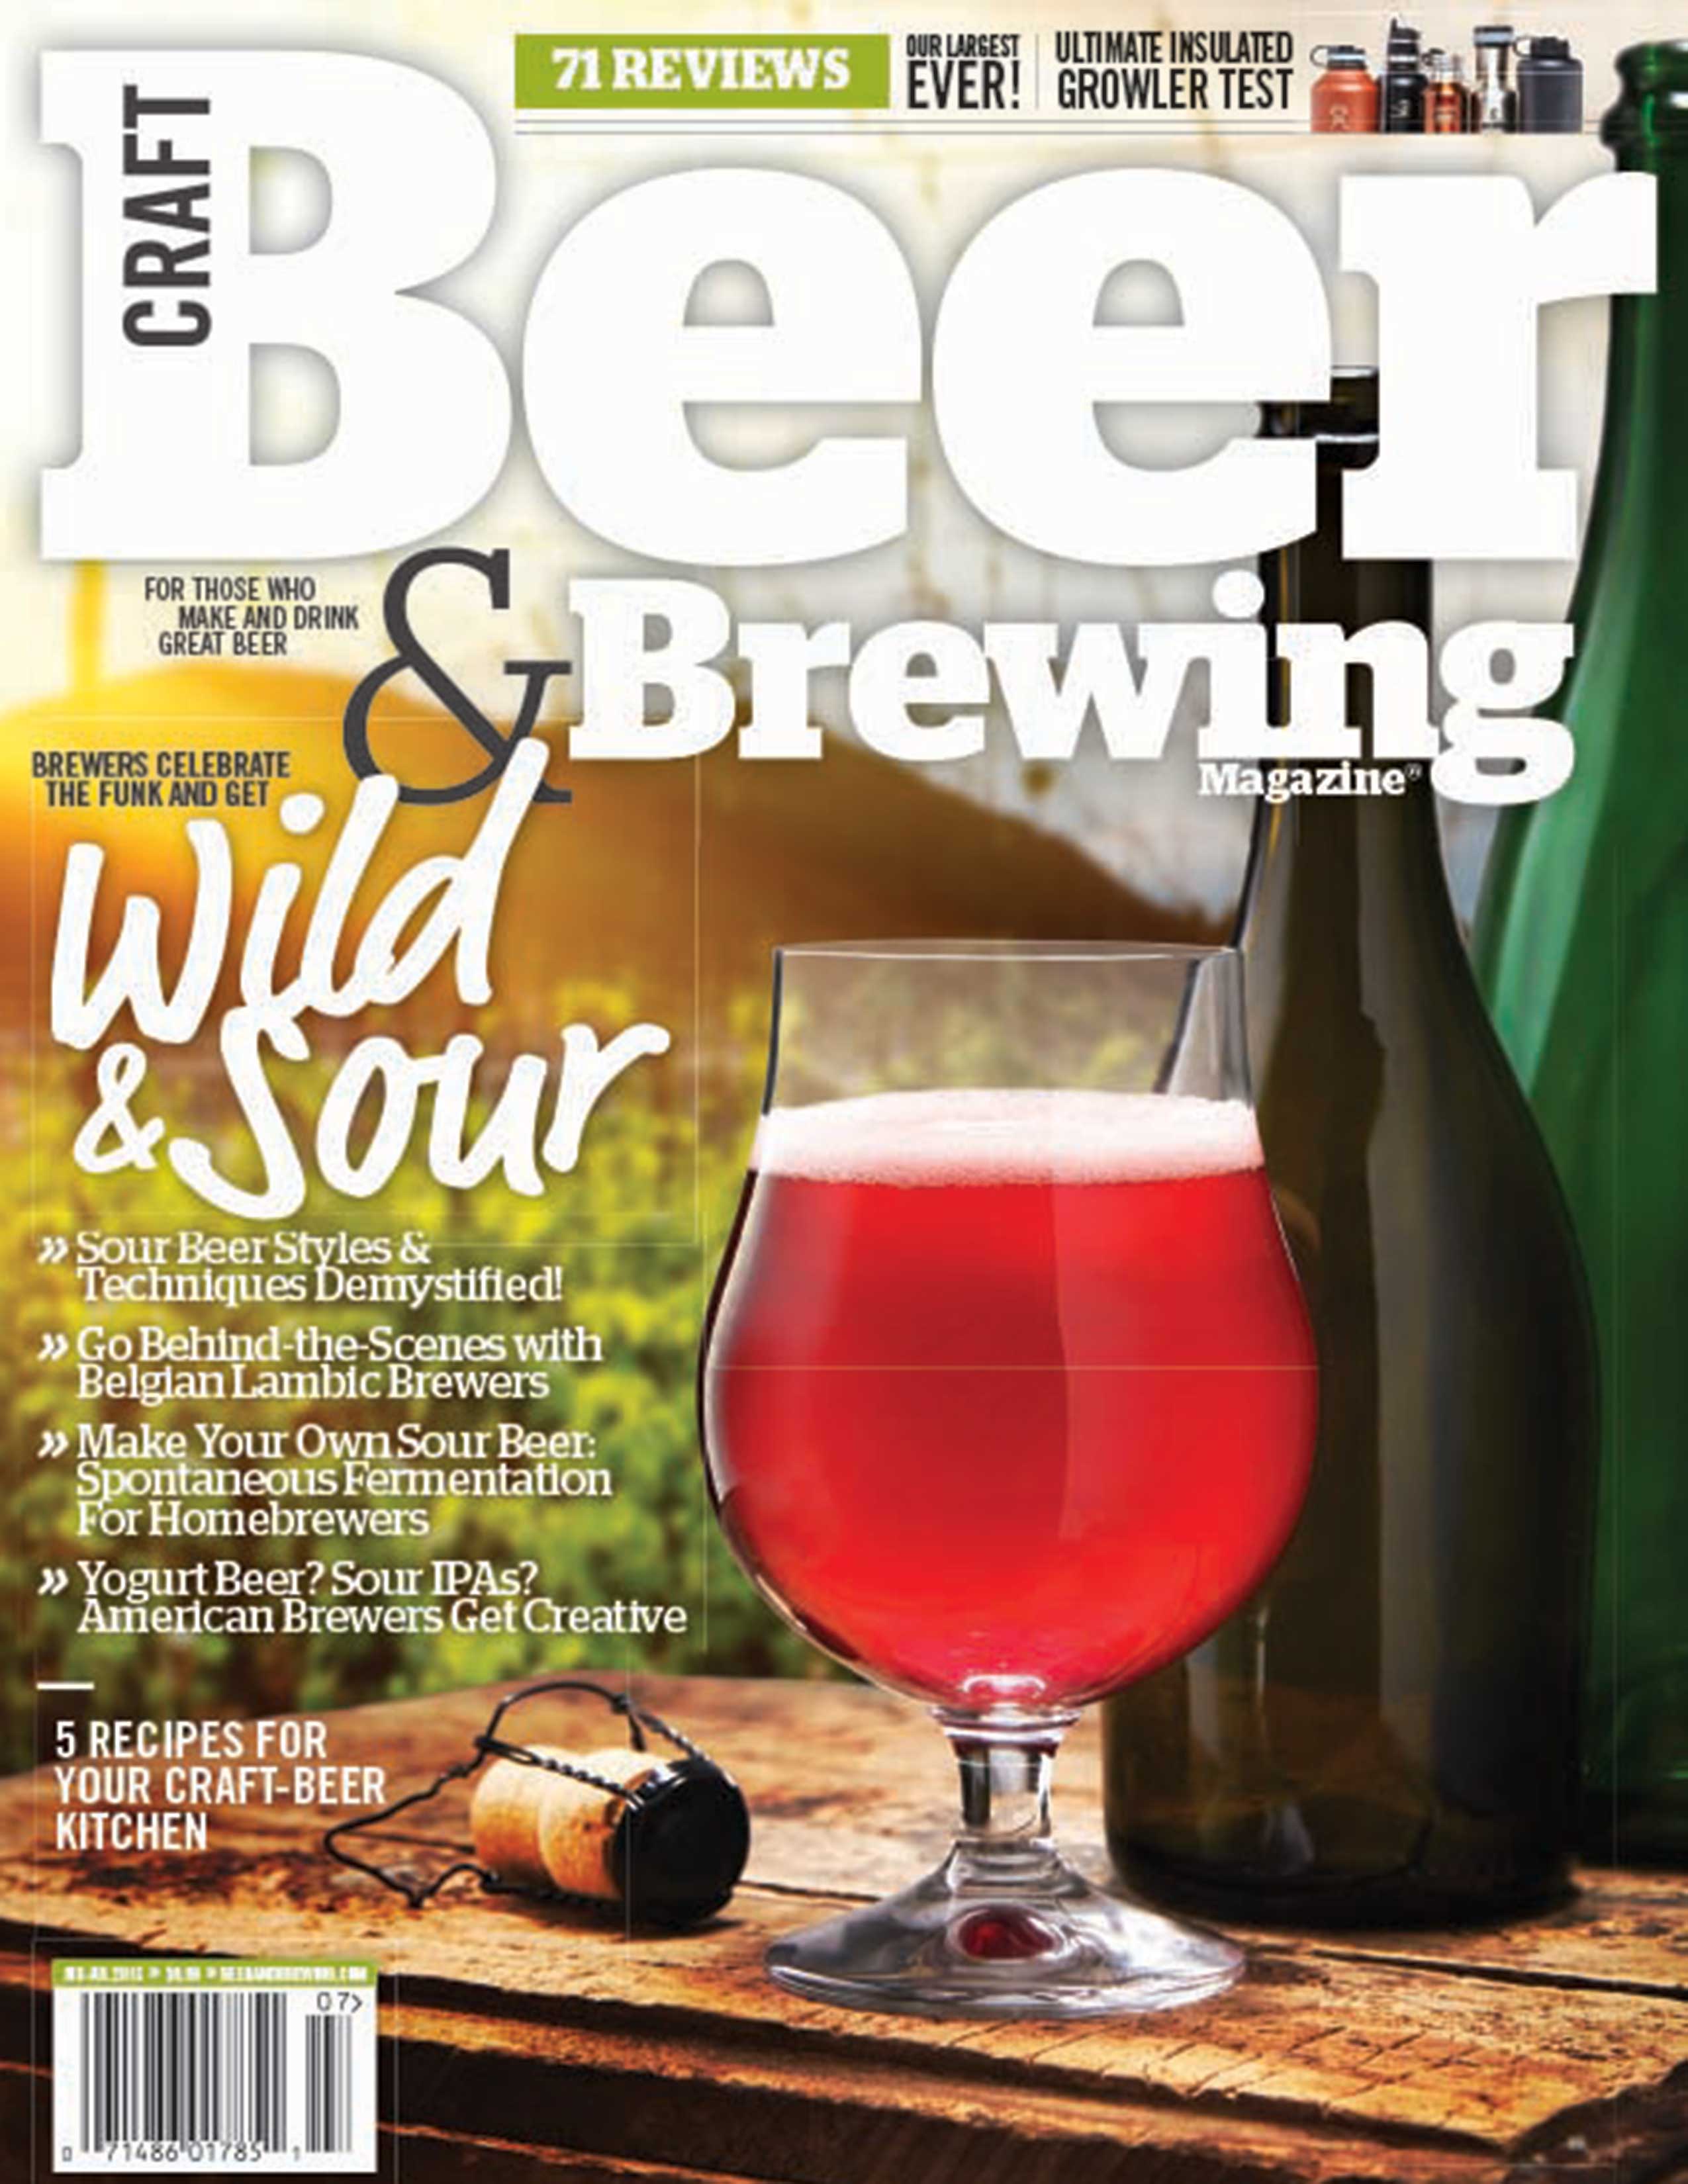 “Fruits of Their Labors” in Craft Beer and Brewing Magazine